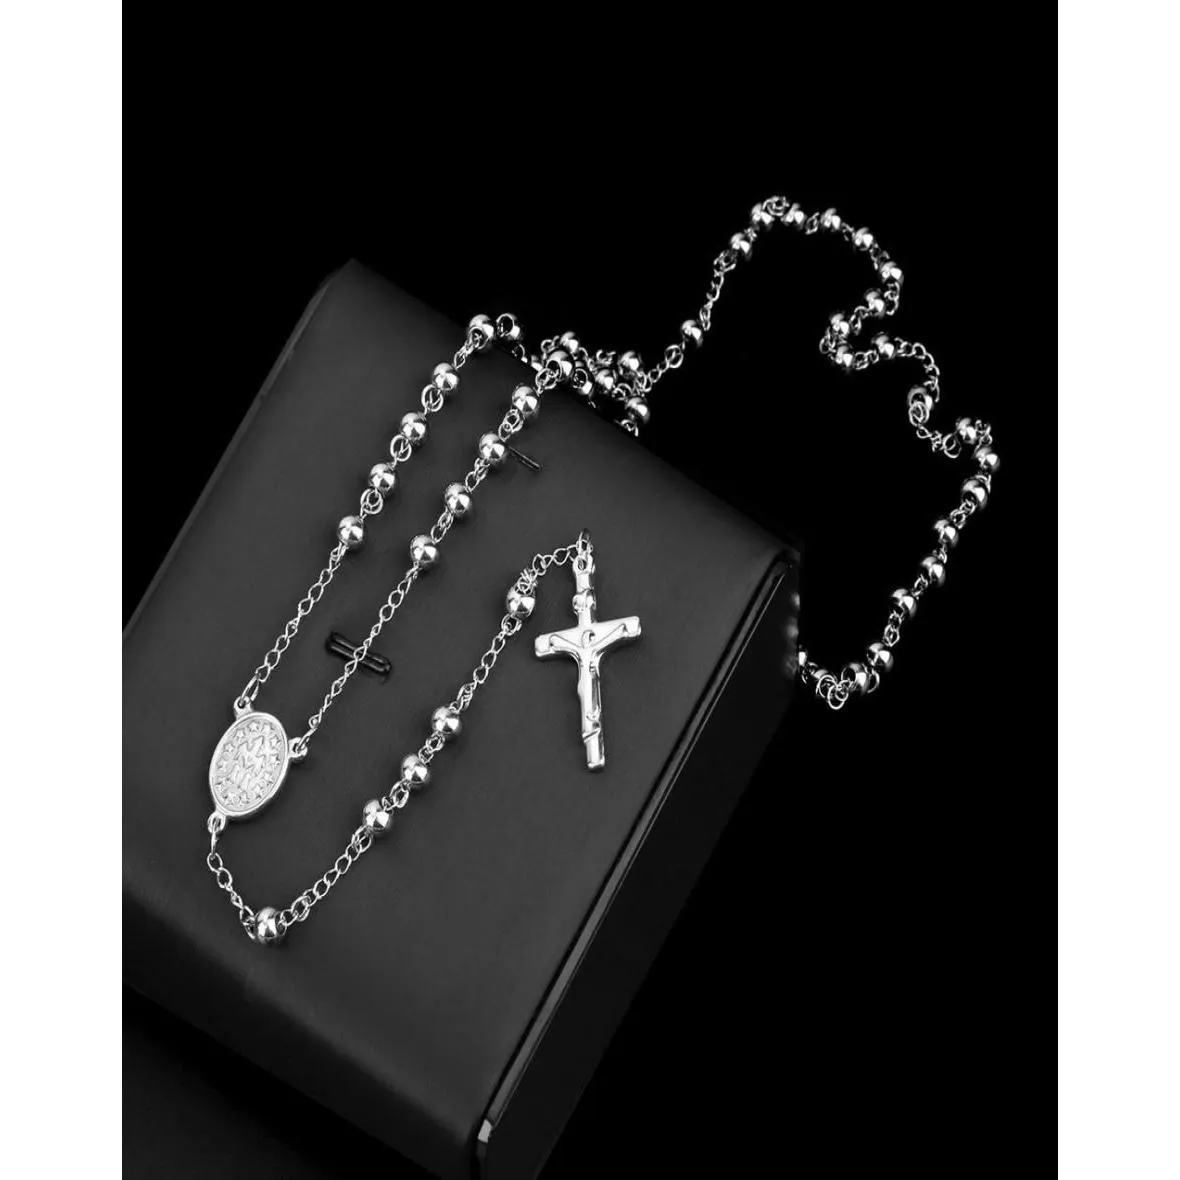 Pendant Necklaces Classic Sier Rosary Beads Chain Crucifix Relius Catholic Stainless Steel Necklace Womens Mens 4Mm/6Mm/8Mm/10Mm172876 Dhzpj